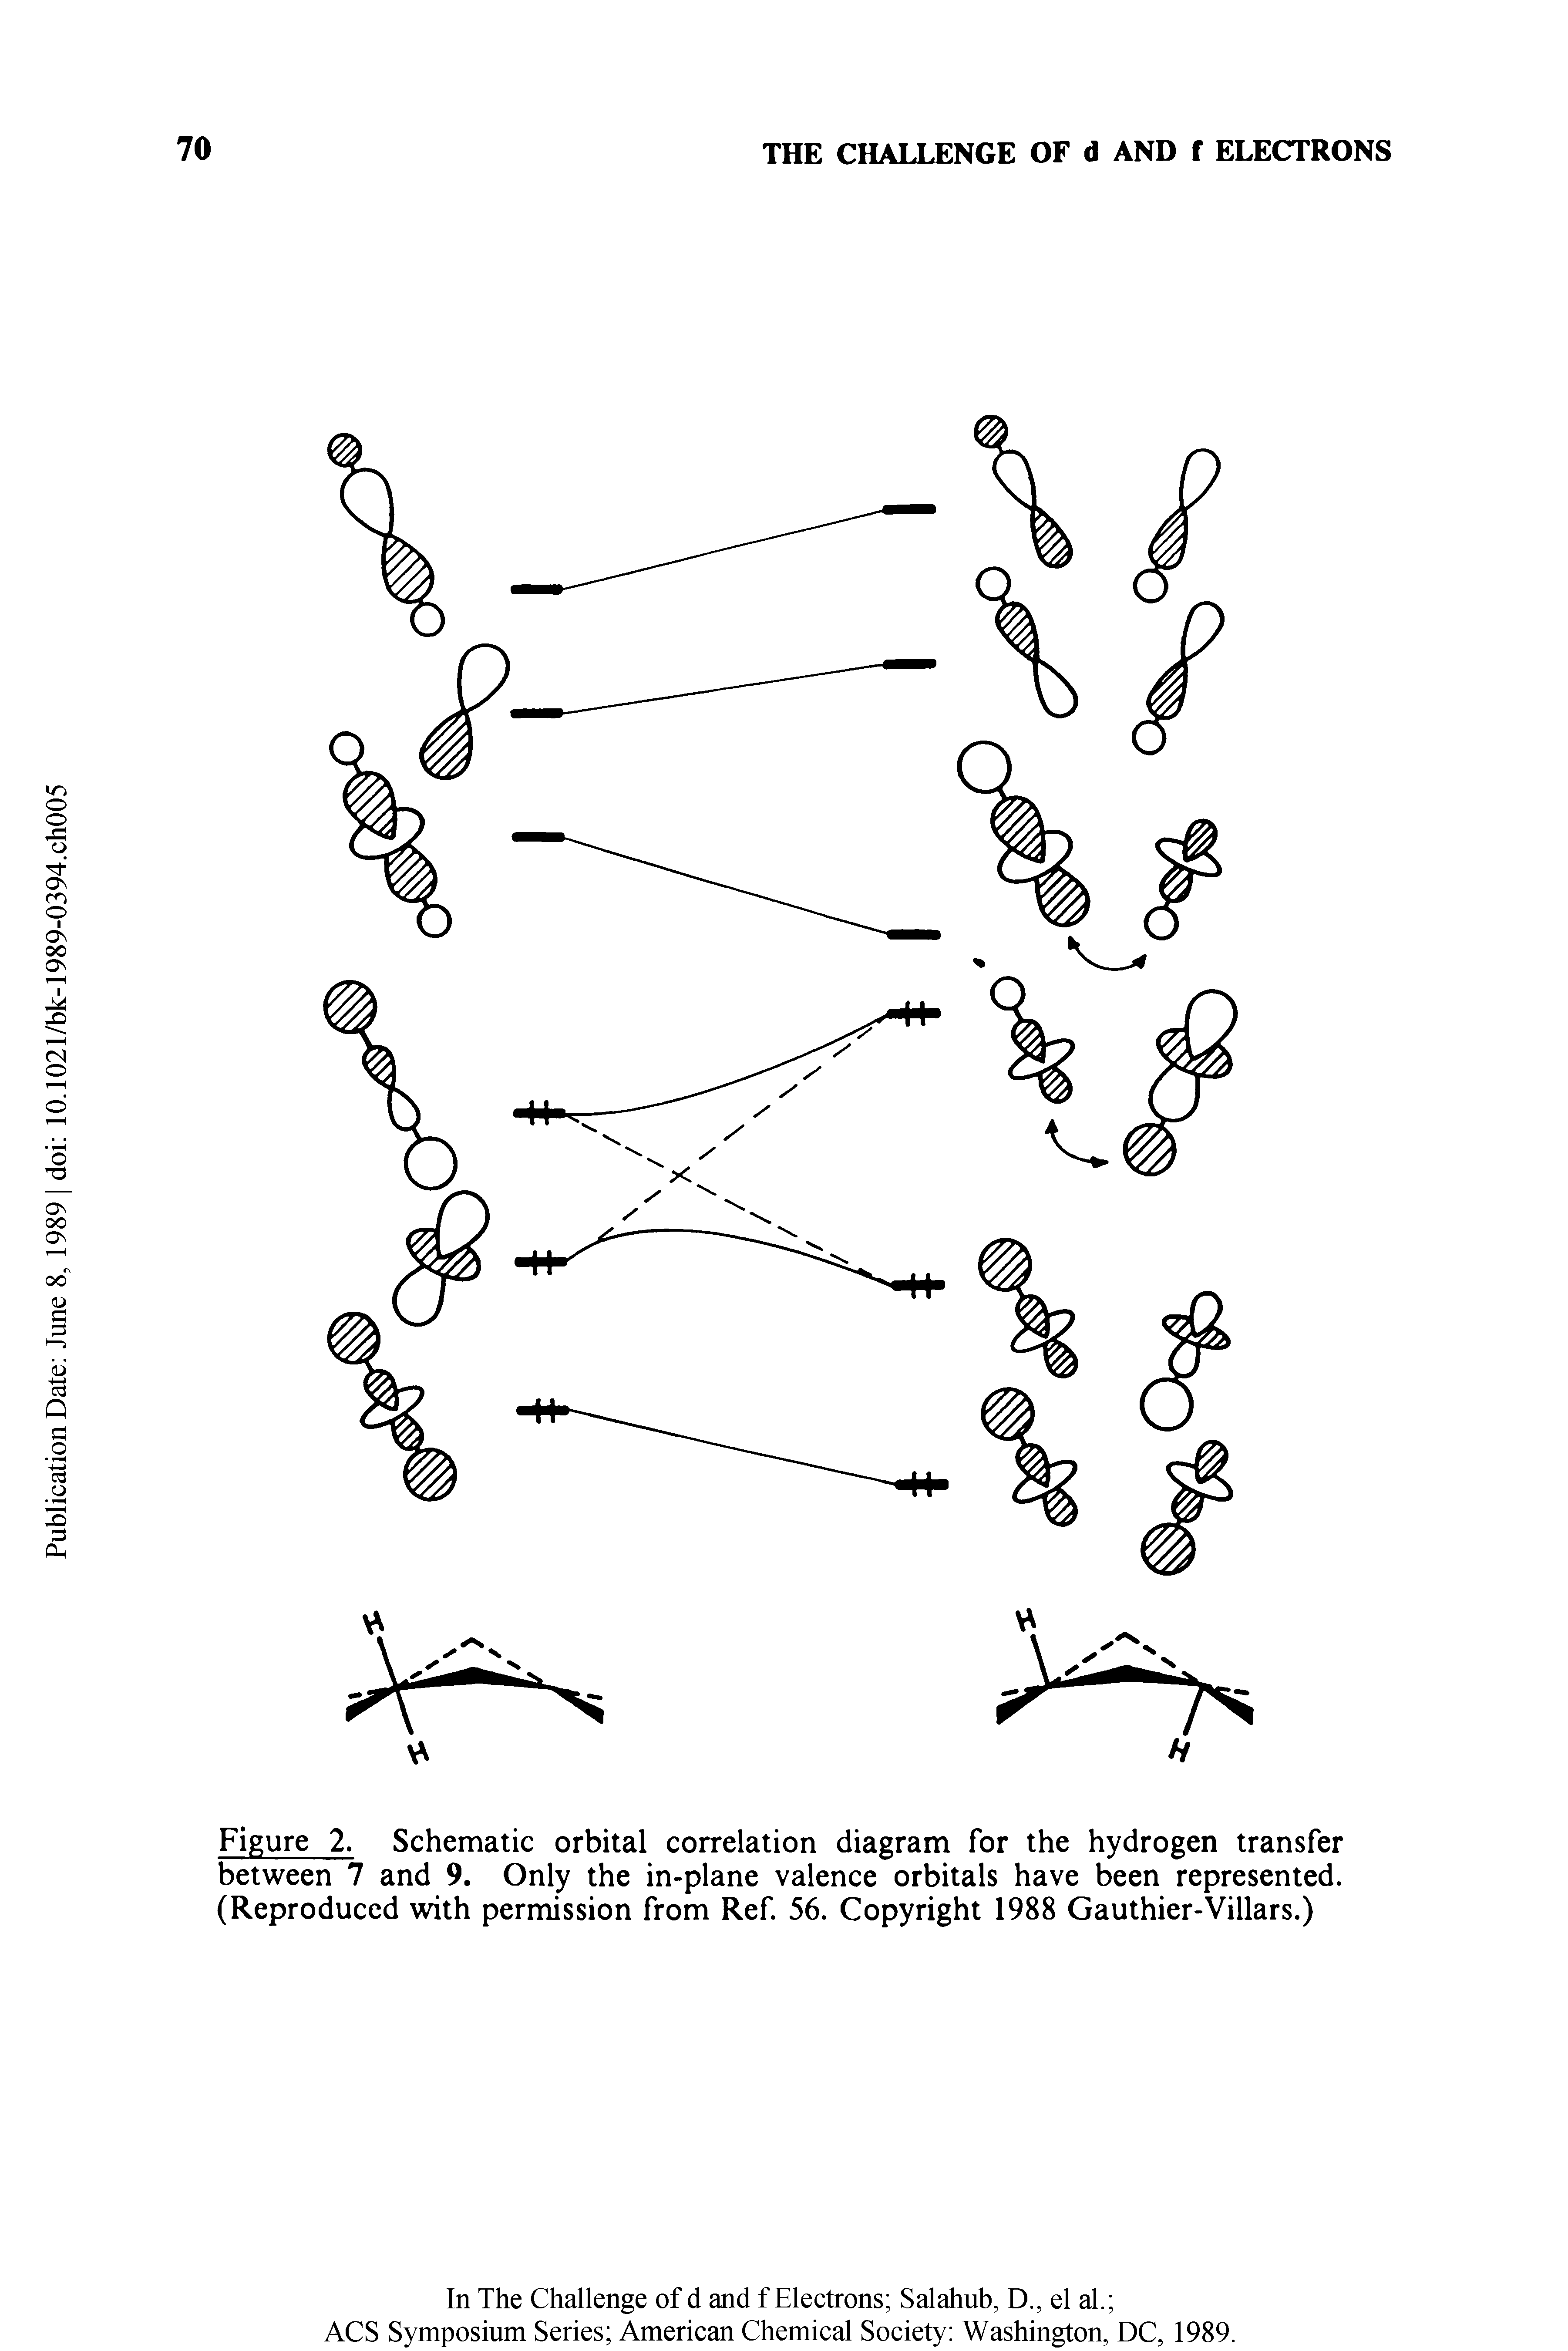 Figure 2. Schematic orbital correlation diagram for the hydrogen transfer between 7 and 9. Only the in-plane valence orbitals have been represented. (Reproduced with permission from Ref. 56. Copyright 1988 Gauthier-Villars.)...